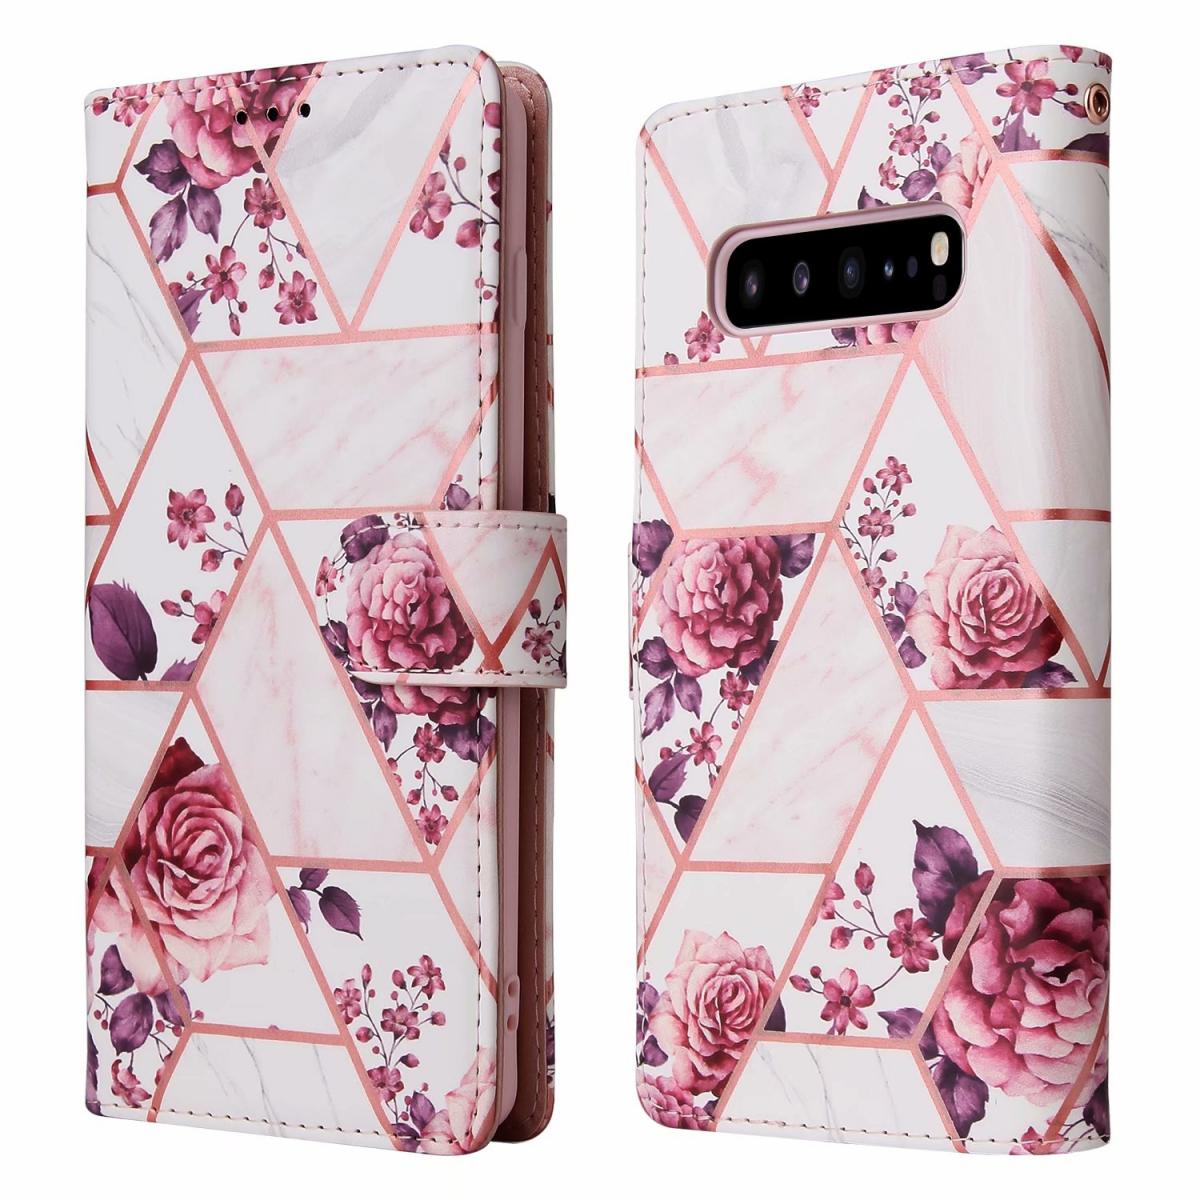 A-One Brand - Marble Grid Plånboksfodral till Galaxy S10 - Roses